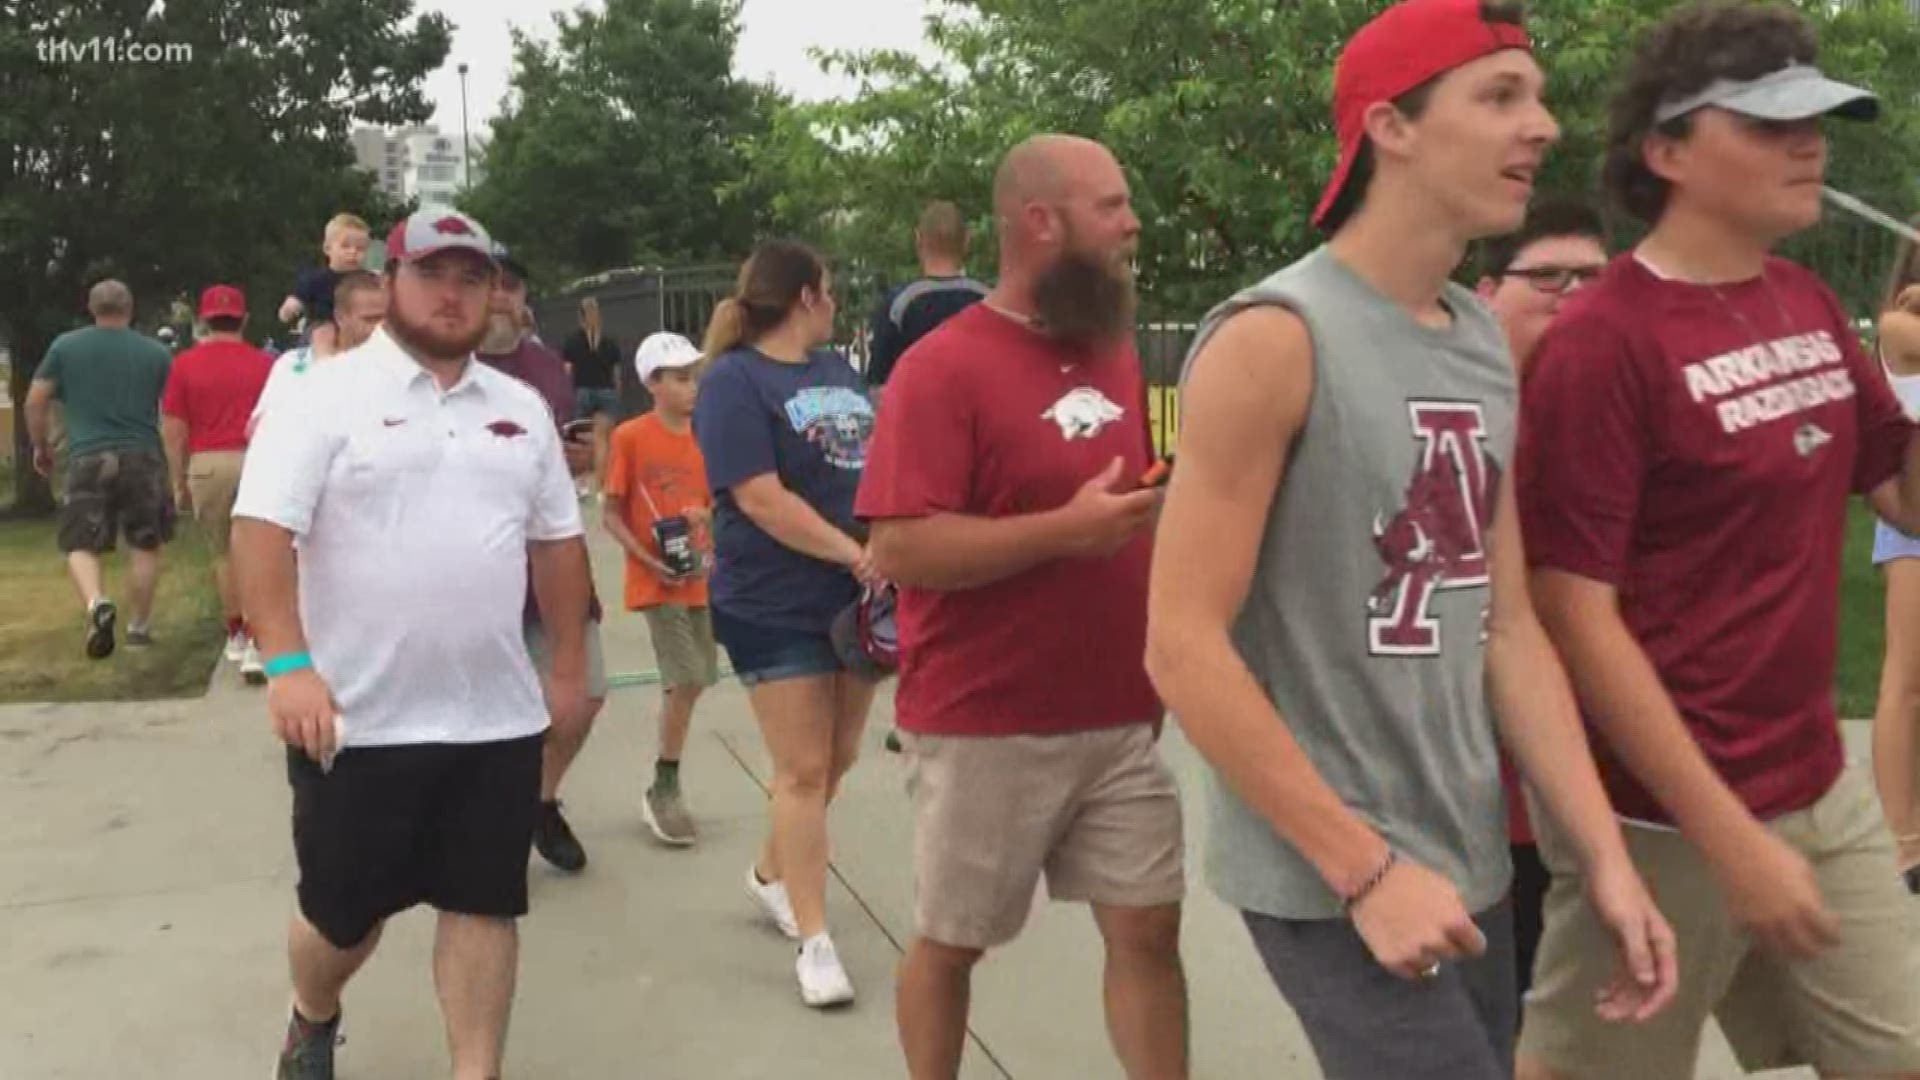 Hogs fans react to game being postponed until Wednesday